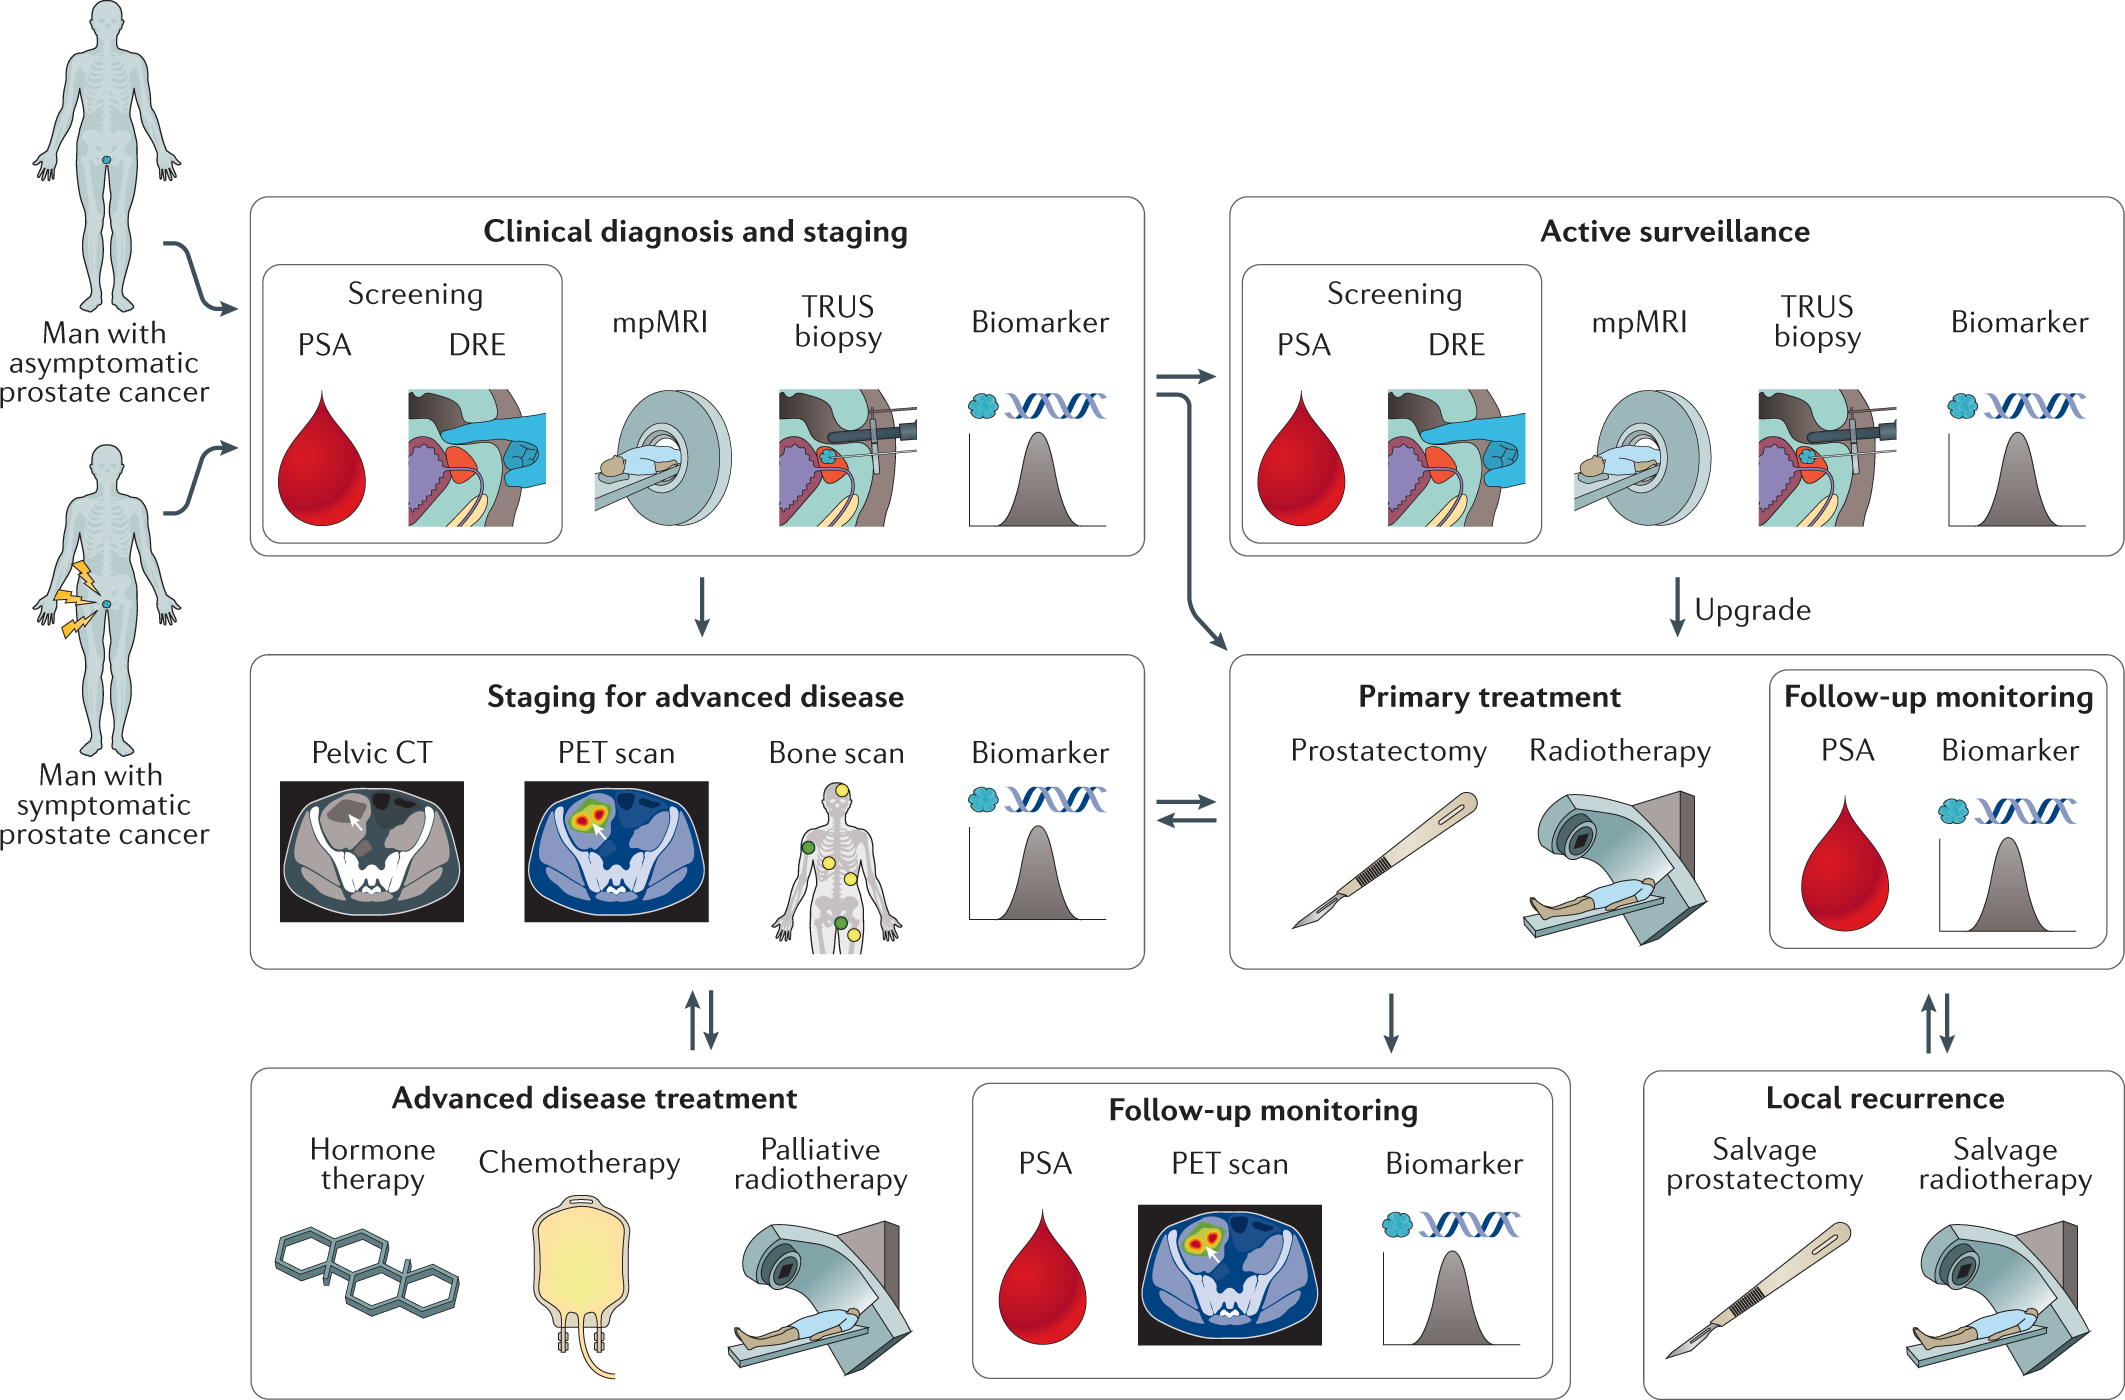 Proteomic discovery of non-invasive biomarkers of localized prostate cancer  using mass spectrometry | Nature Reviews Urology